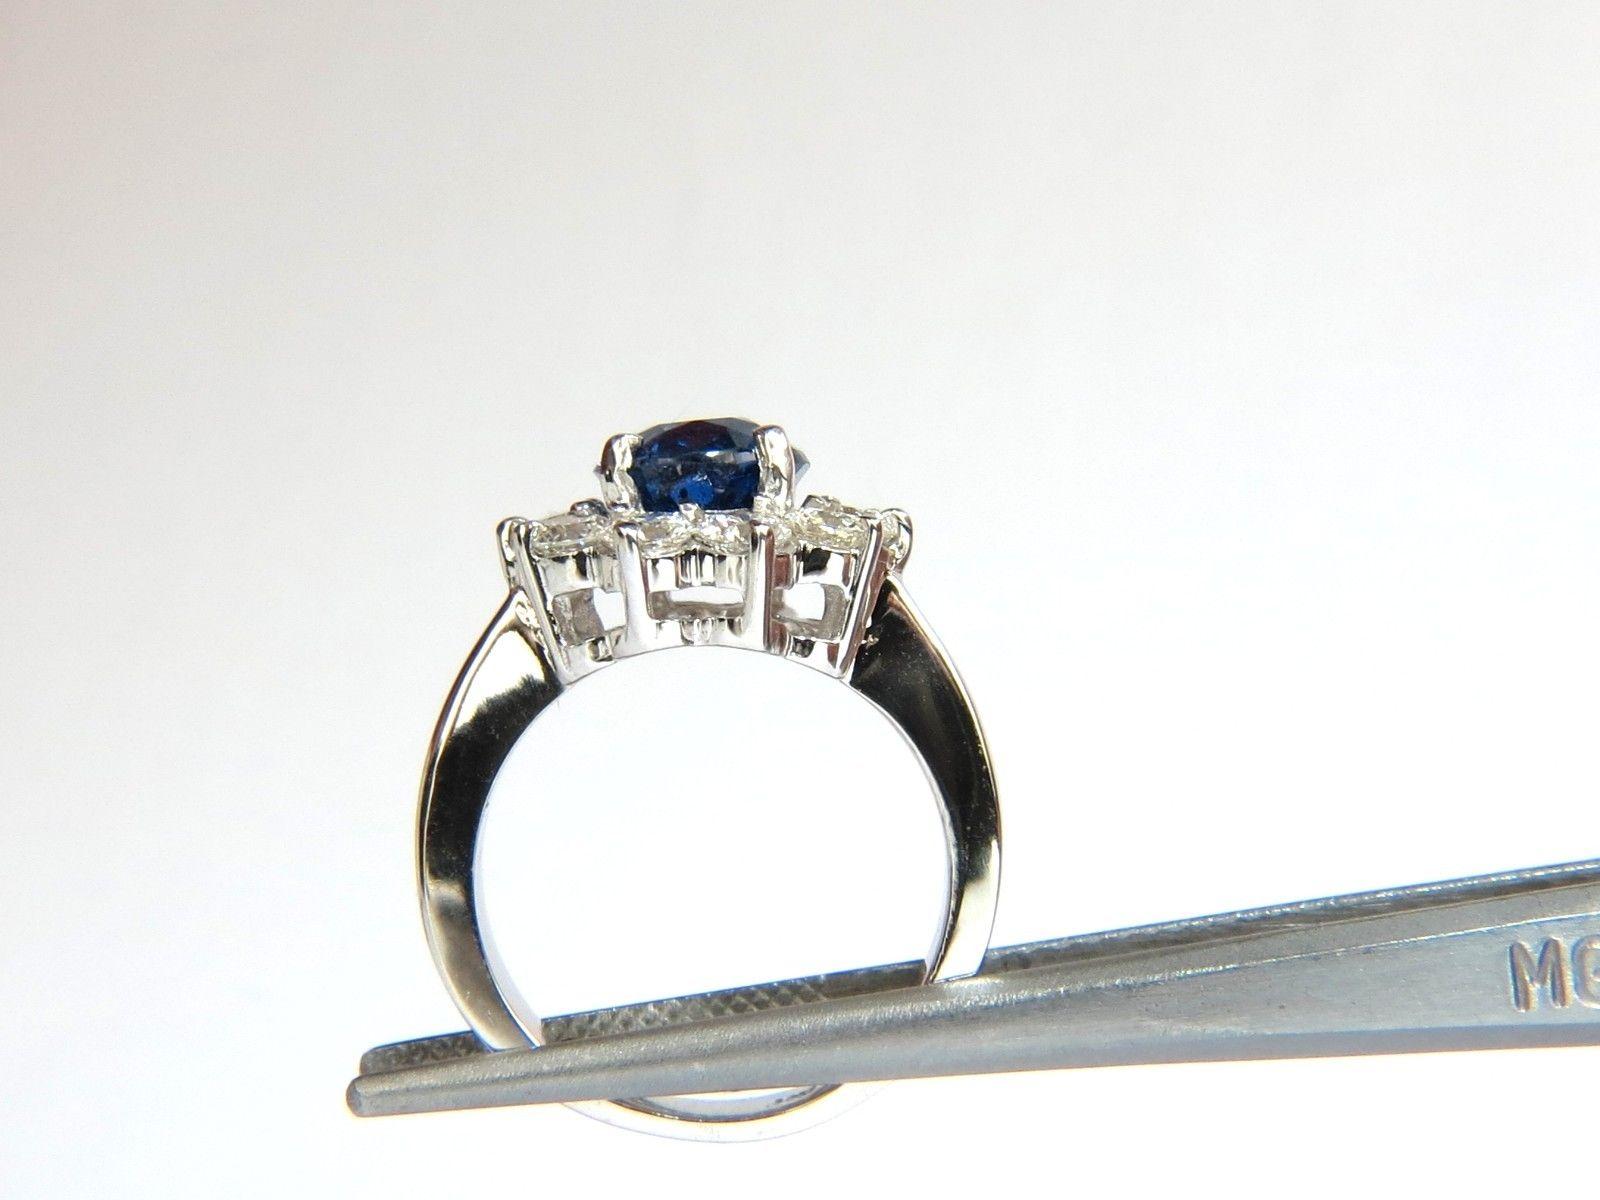 The No Heat Investment.



GIA 2.68ct. Natural Sapphire

Full cut brilliant Oval cut

Clean VS clarity

Transparent and vibrant top gem Vivid Supreme Blue Classic


GIA # 1152273265

*Please see report scan in photos section above



8.67 X 7.76 X